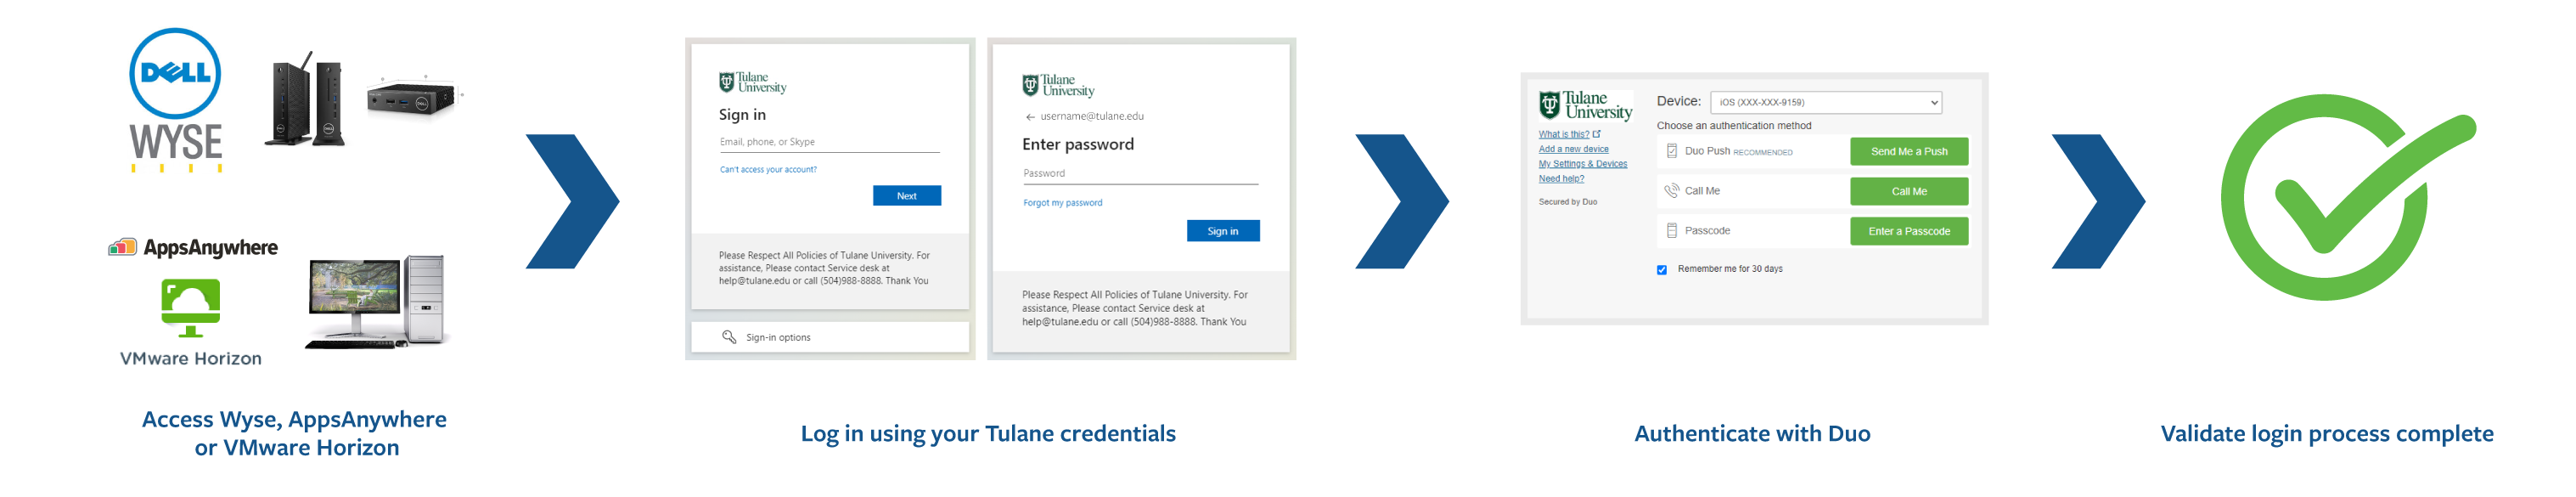 Access Wyse, AppsAnywhere, or VMWare Horizon. Login using your Tulane credentials. Authenticate with Duo. Validate login process complete.